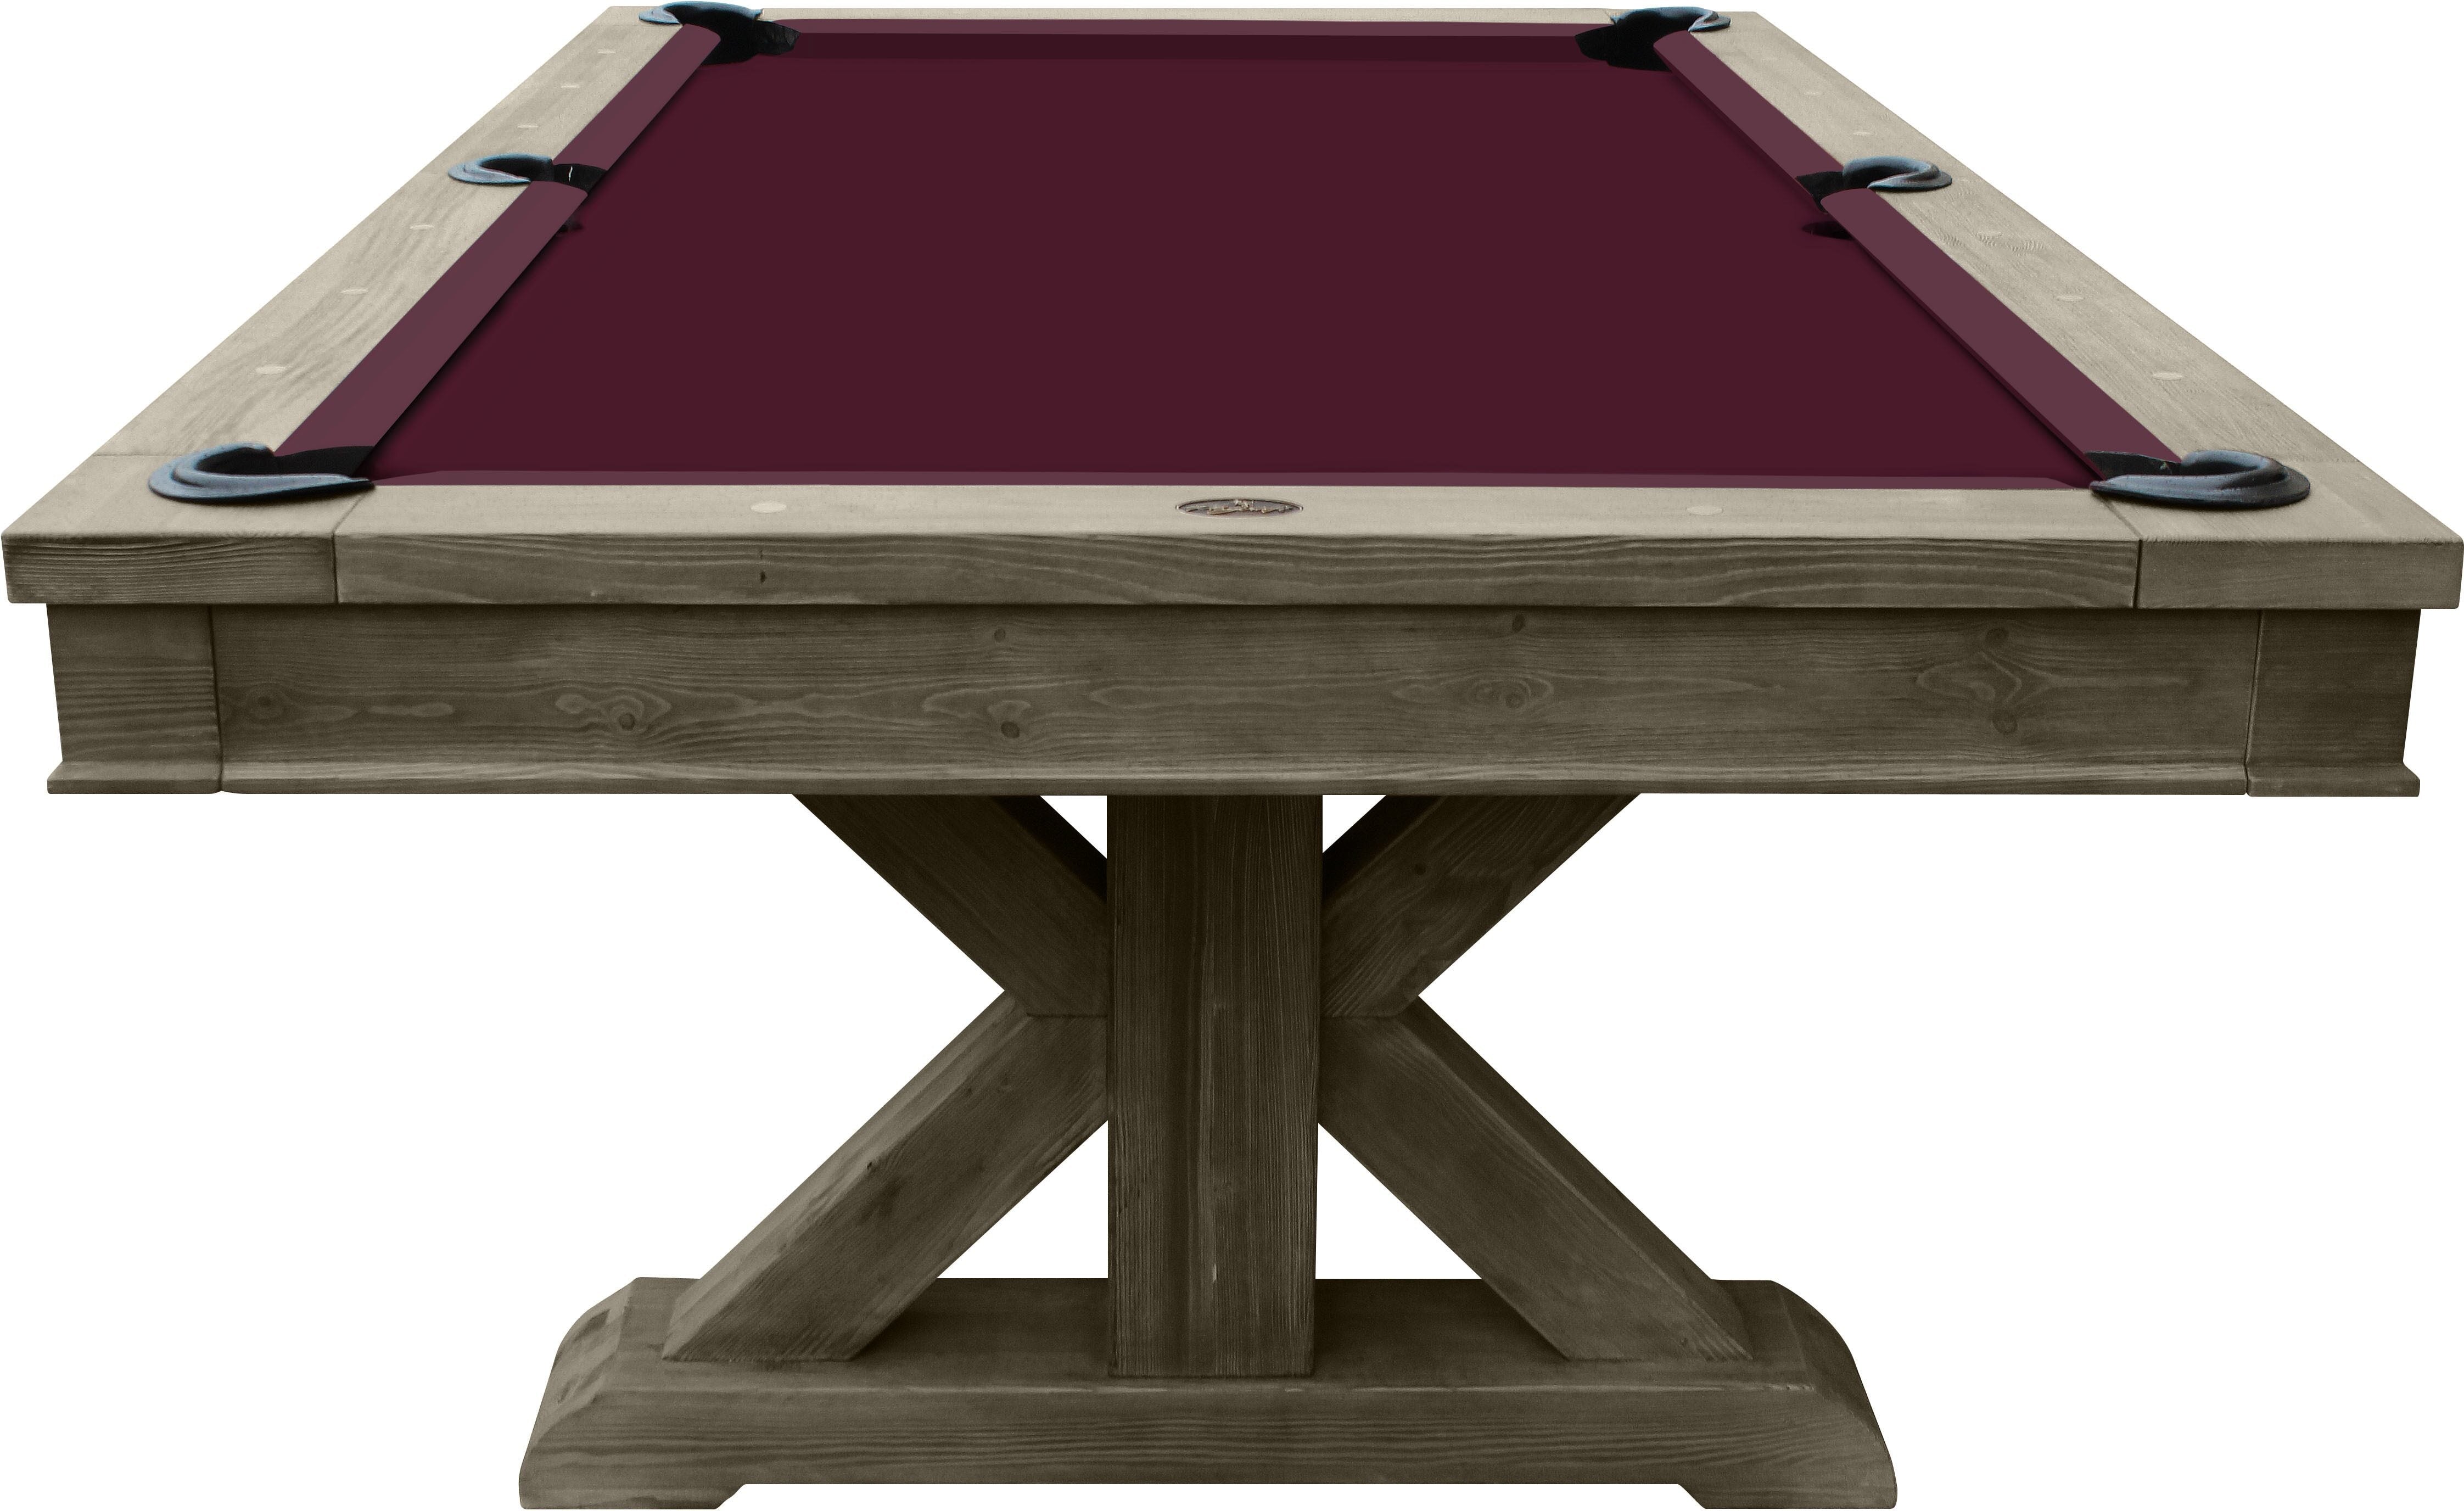 Playcraft Brazos River 8' Slate Pool Table w/ Leather Drop Pockets in Weathered Gray